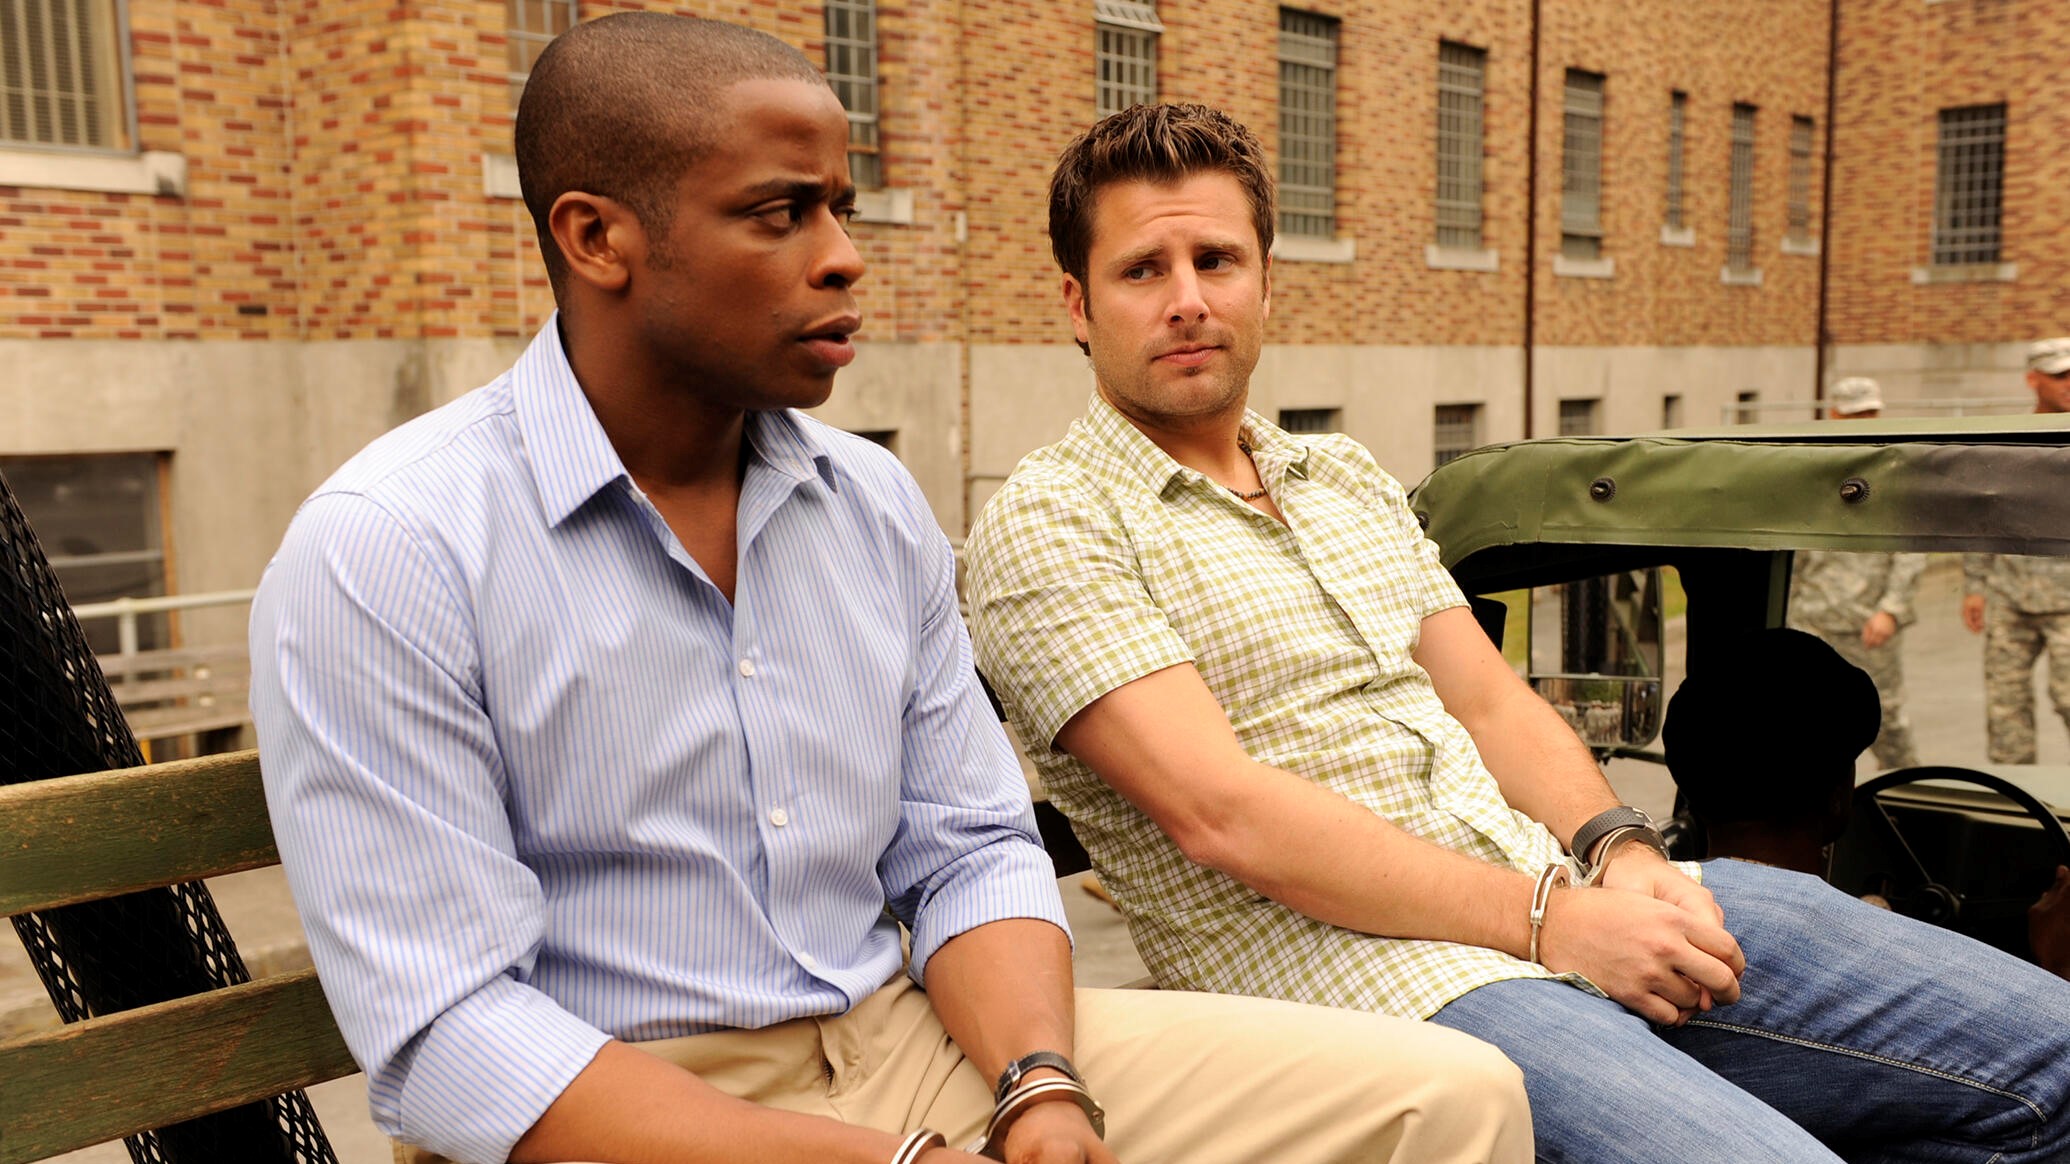 Detective Comedy-Mystery Movies & TV Shows Like 'Psych'